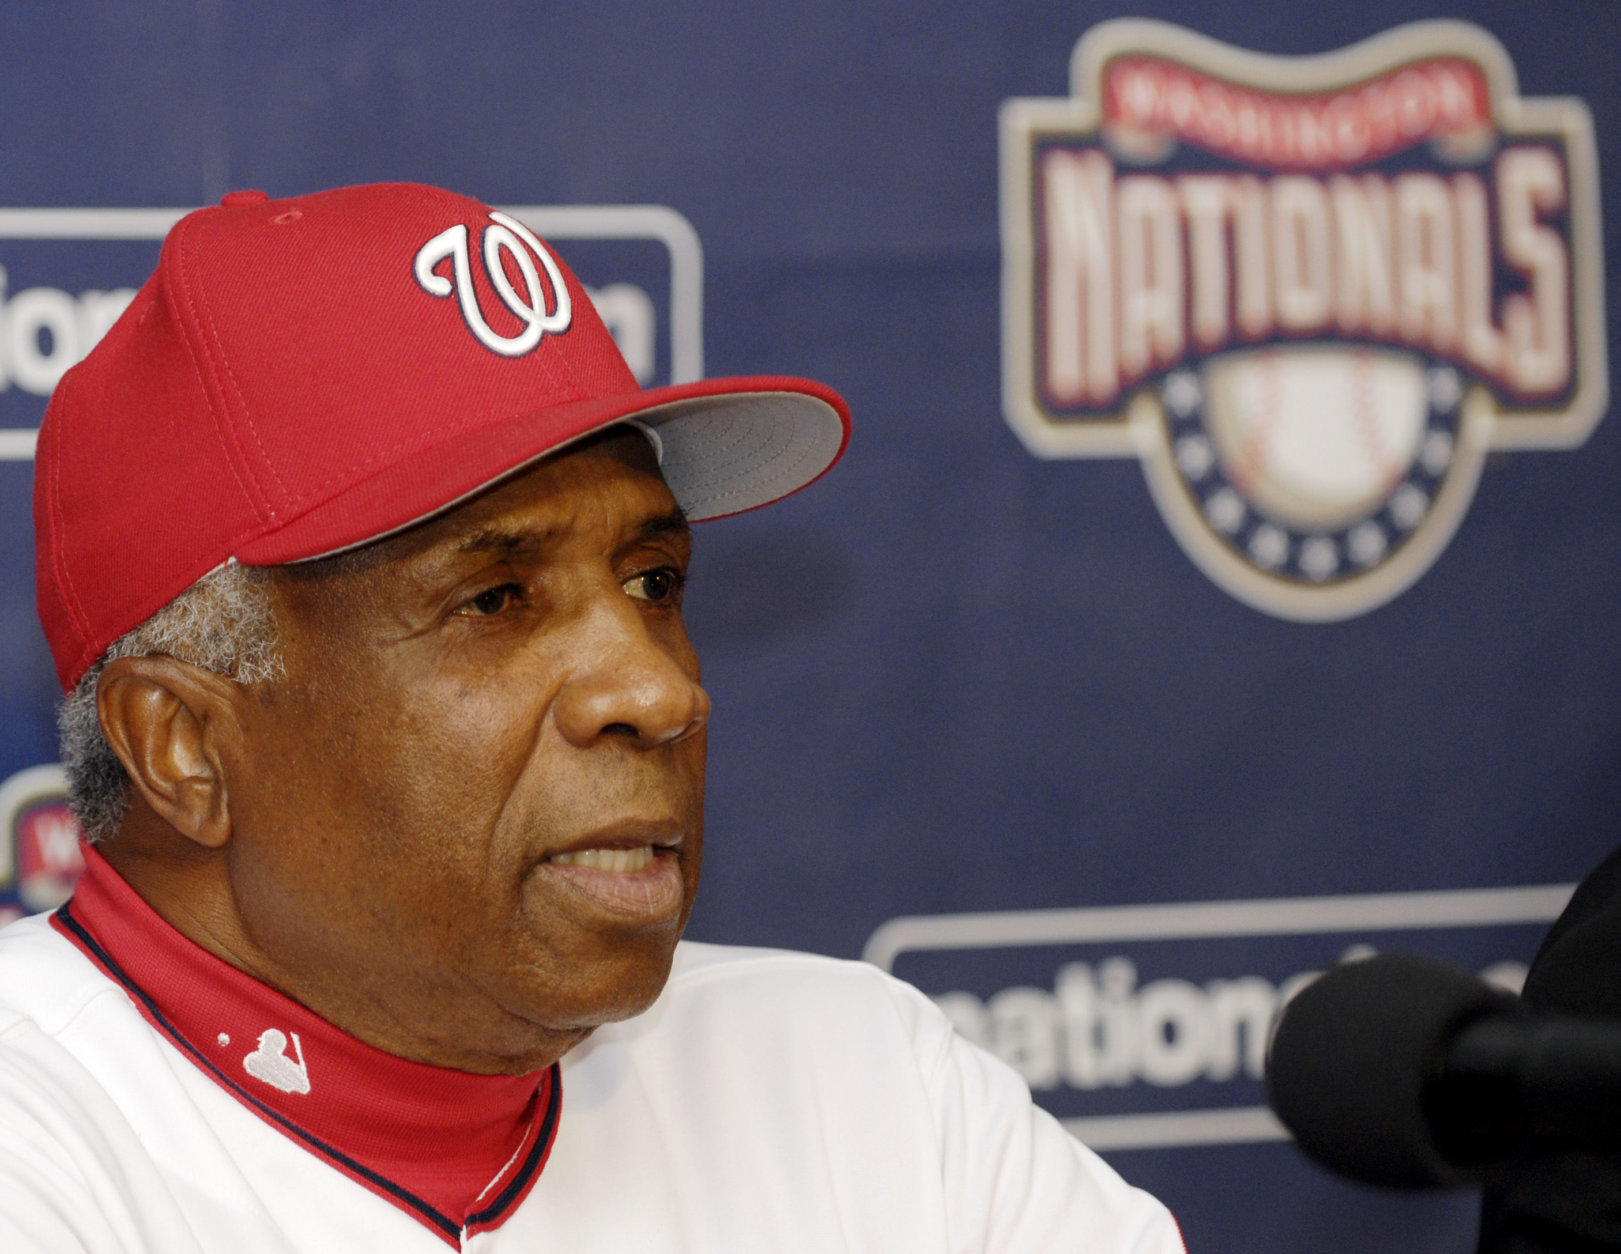 Washington Nationals manager Frank Robinson speaks at a news conference where the team announced that he will not return to manage in the 2007 baseball season, Saturday, Sept. 30, 2006, in Washington. (AP Photo/Nick Wass)